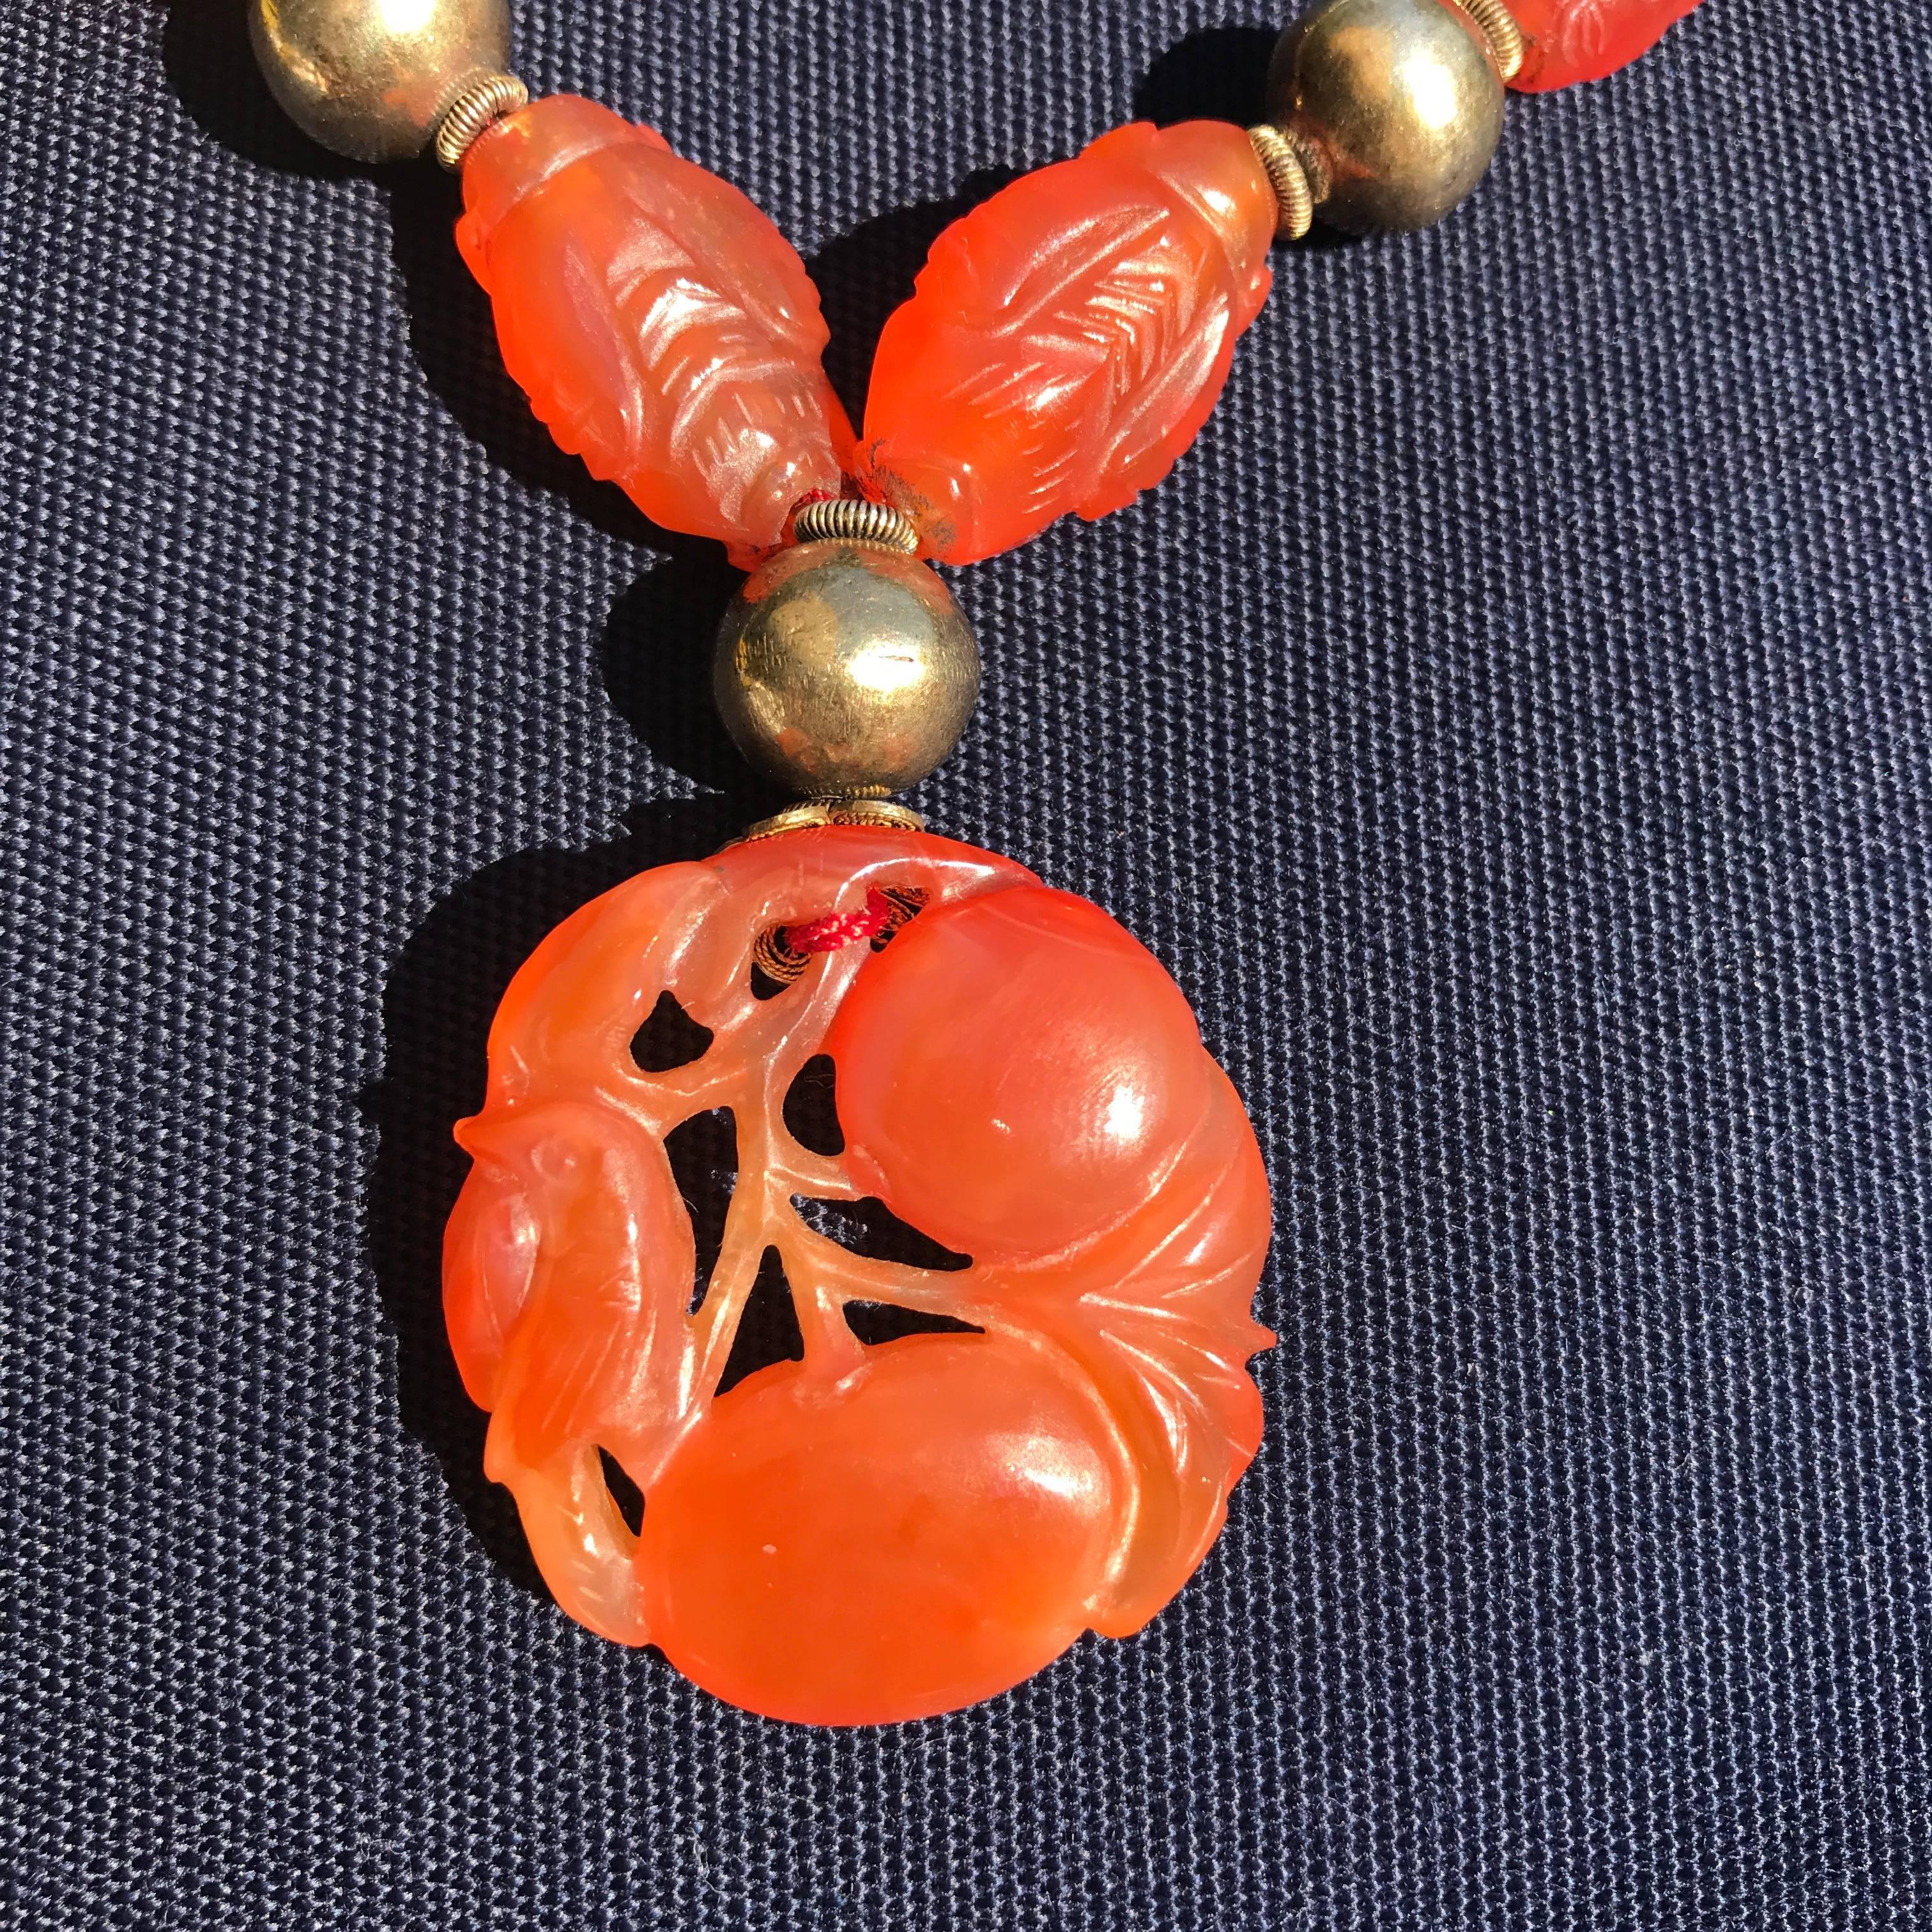 Antique necklace of gilded silver and carnelian stones depicting a parrot and choppy Chinese figure. Provenance to a American businessman living in China in the beginning of the 20th century.